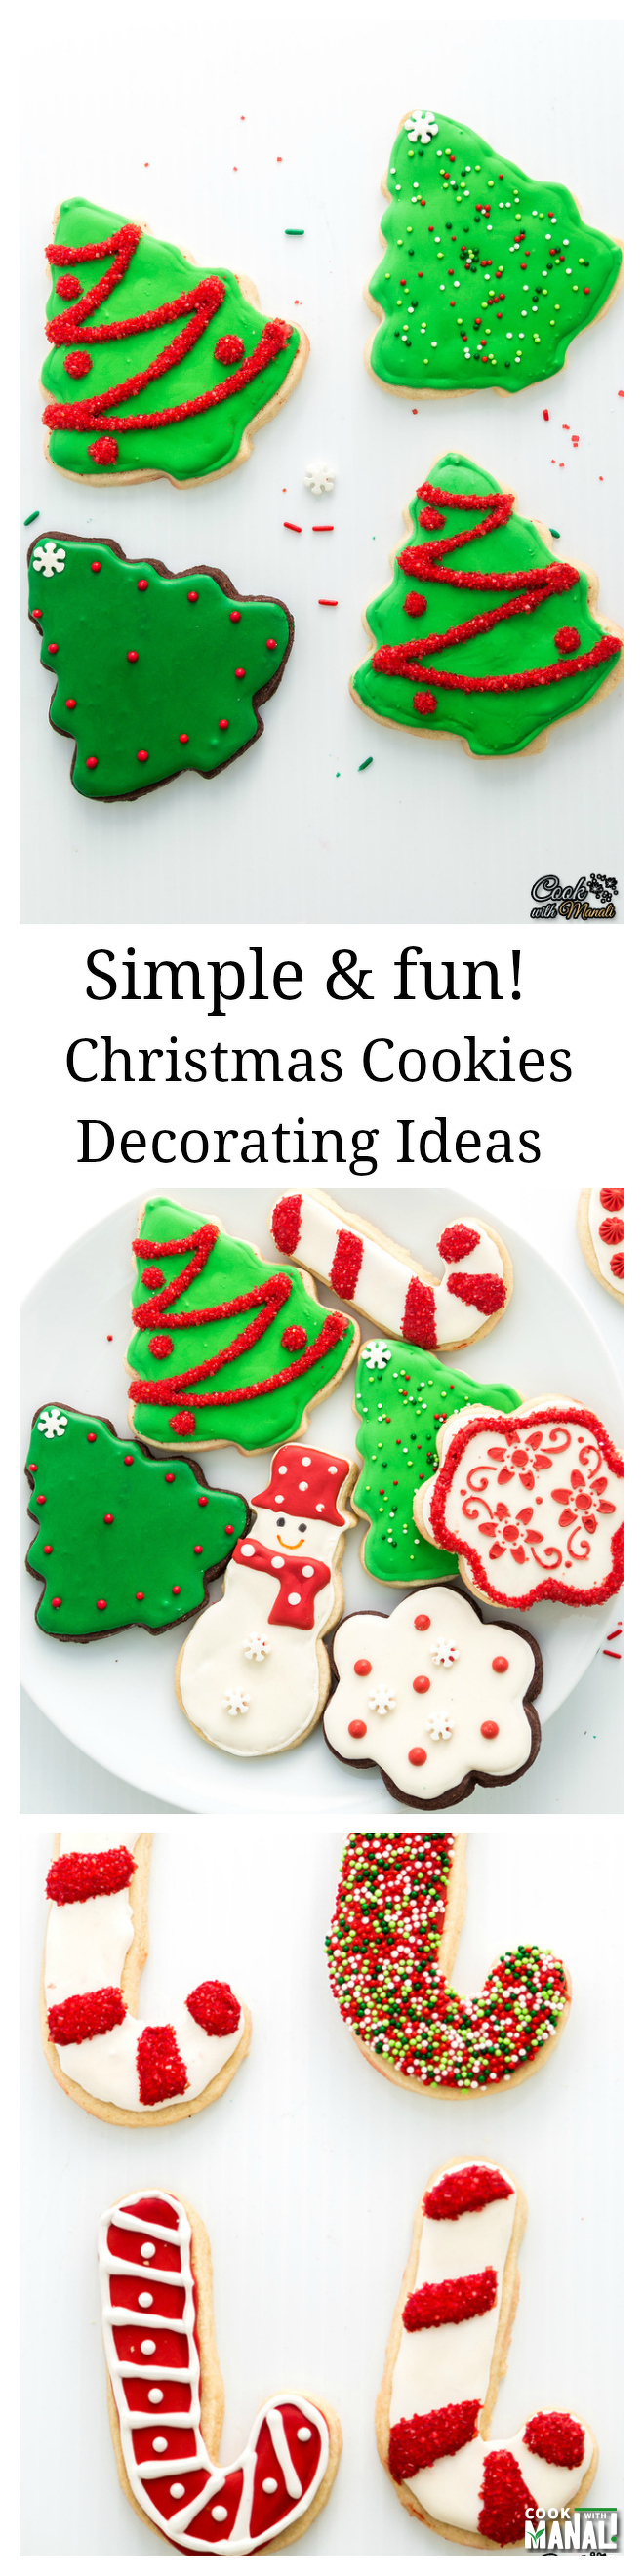 Christmas-Sugar-Cookies-Decorating-Ideas Collage